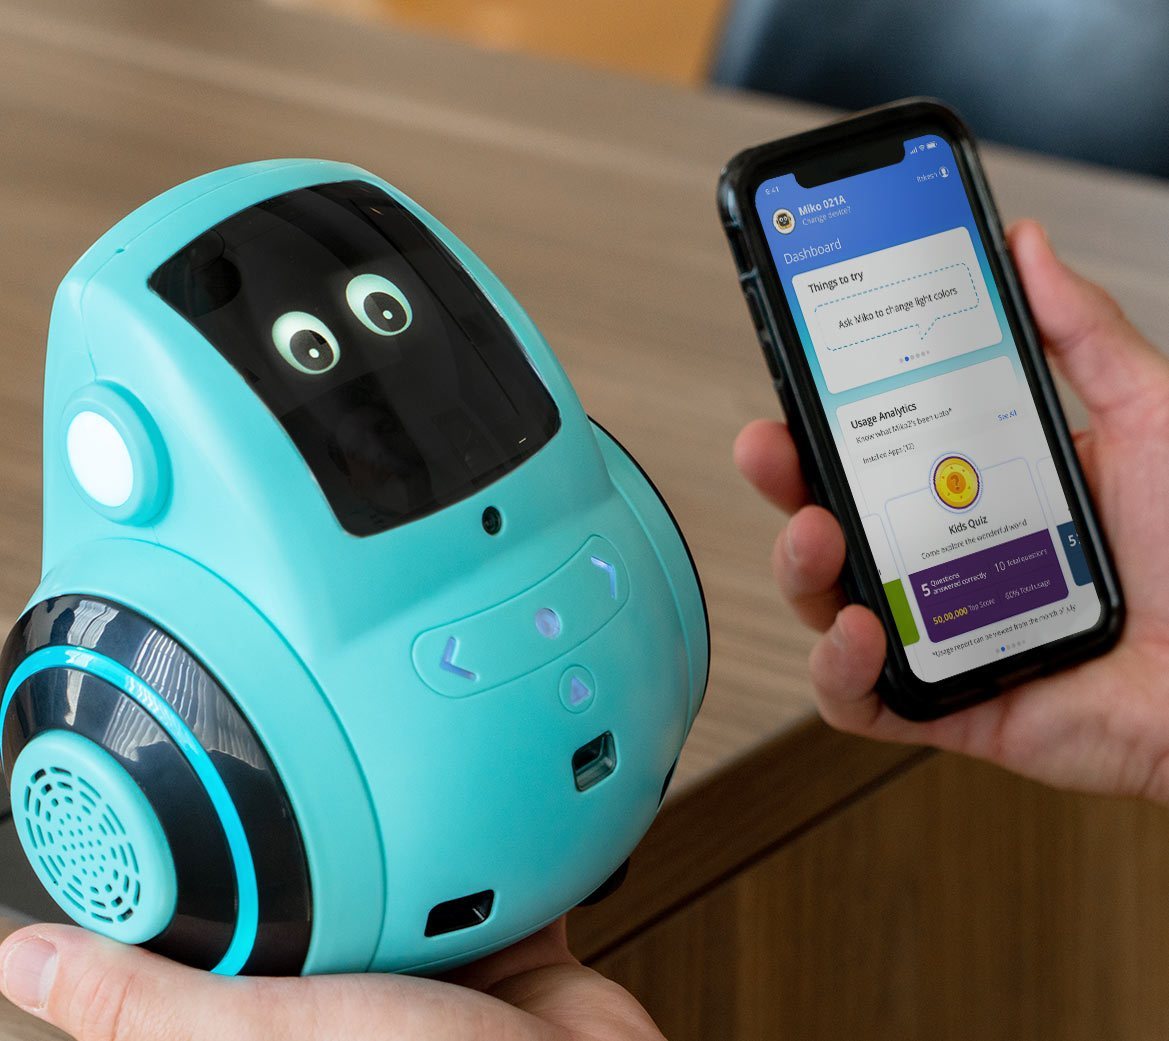 Miko the robot: Meet your child's new companion